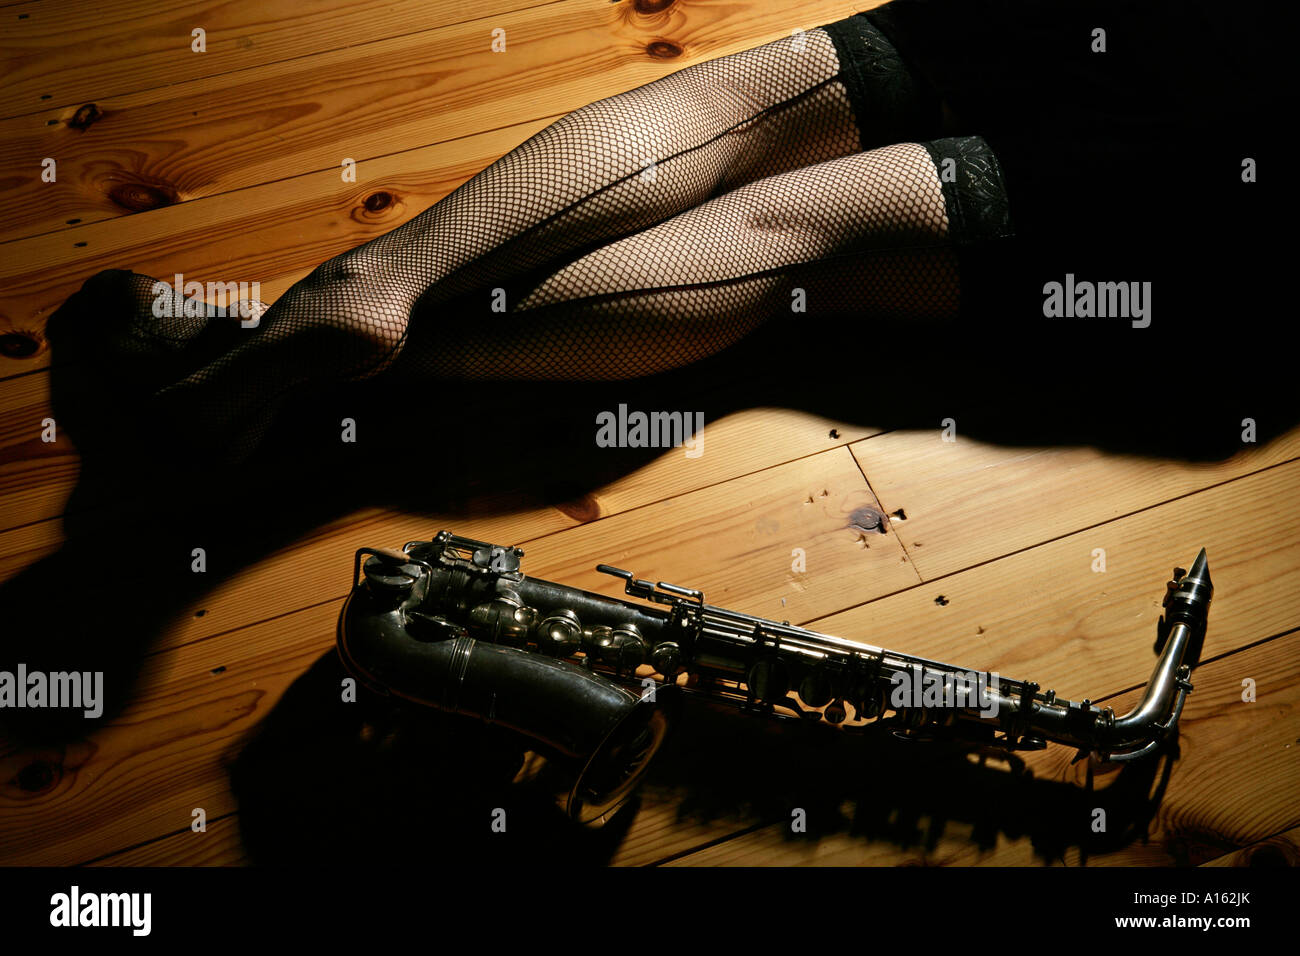 late night or low light image of a pair of female womans legs in fishnet  stockings alongside an alto sax and a glass of whisky Stock Photo